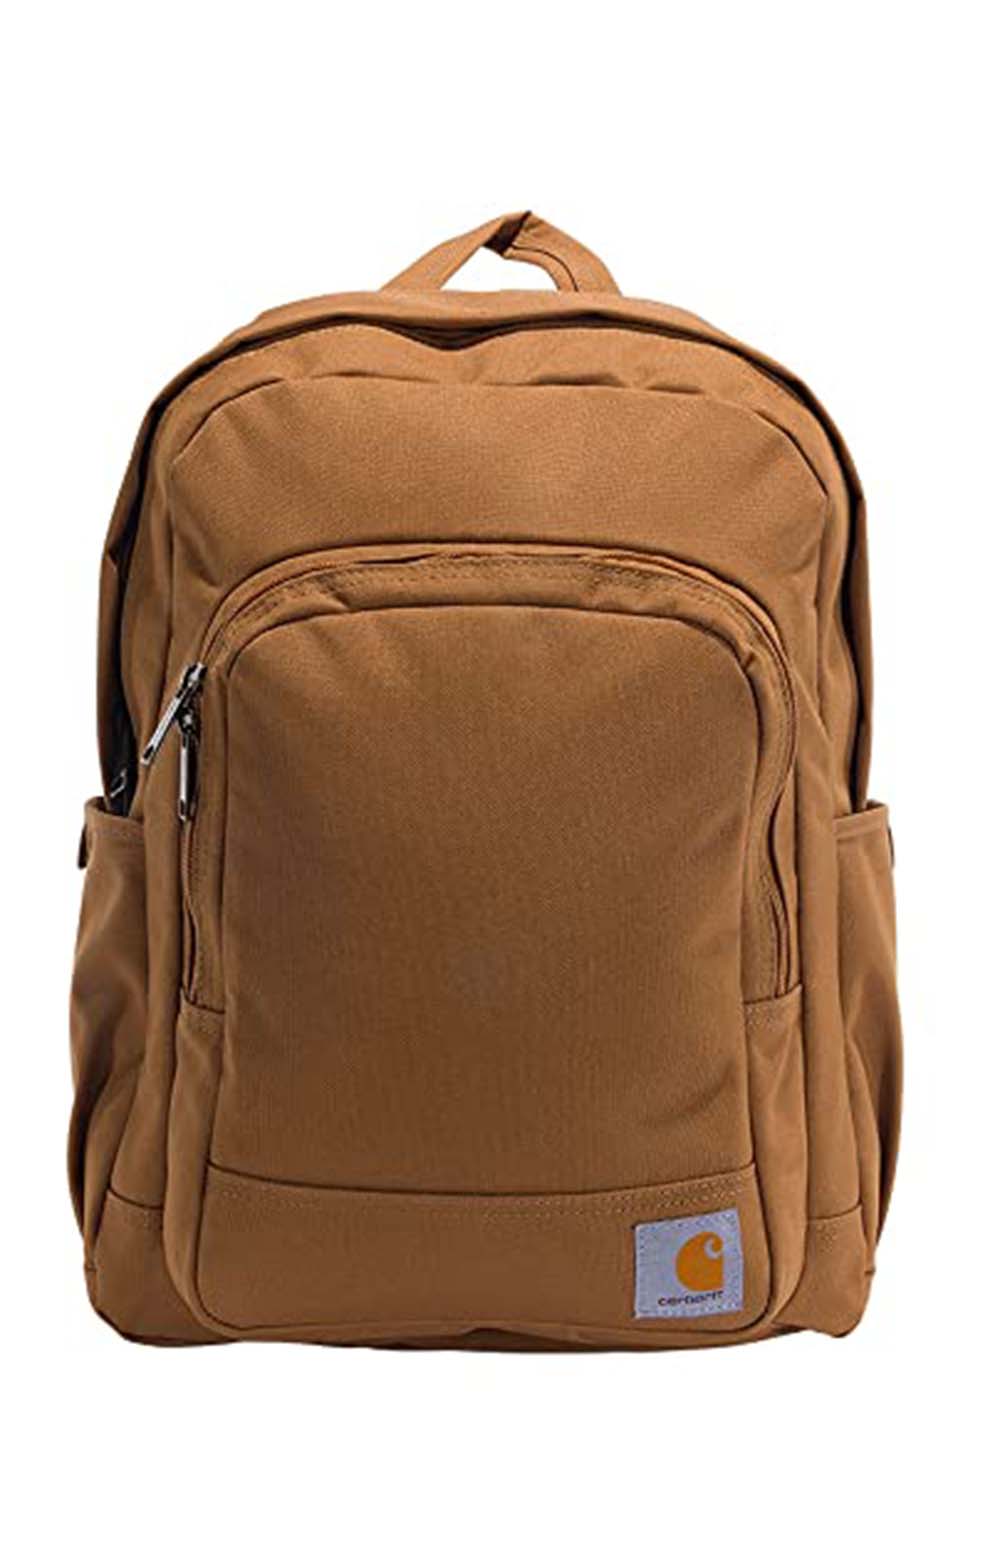 25 L Classic Laptop Backpack - Brown